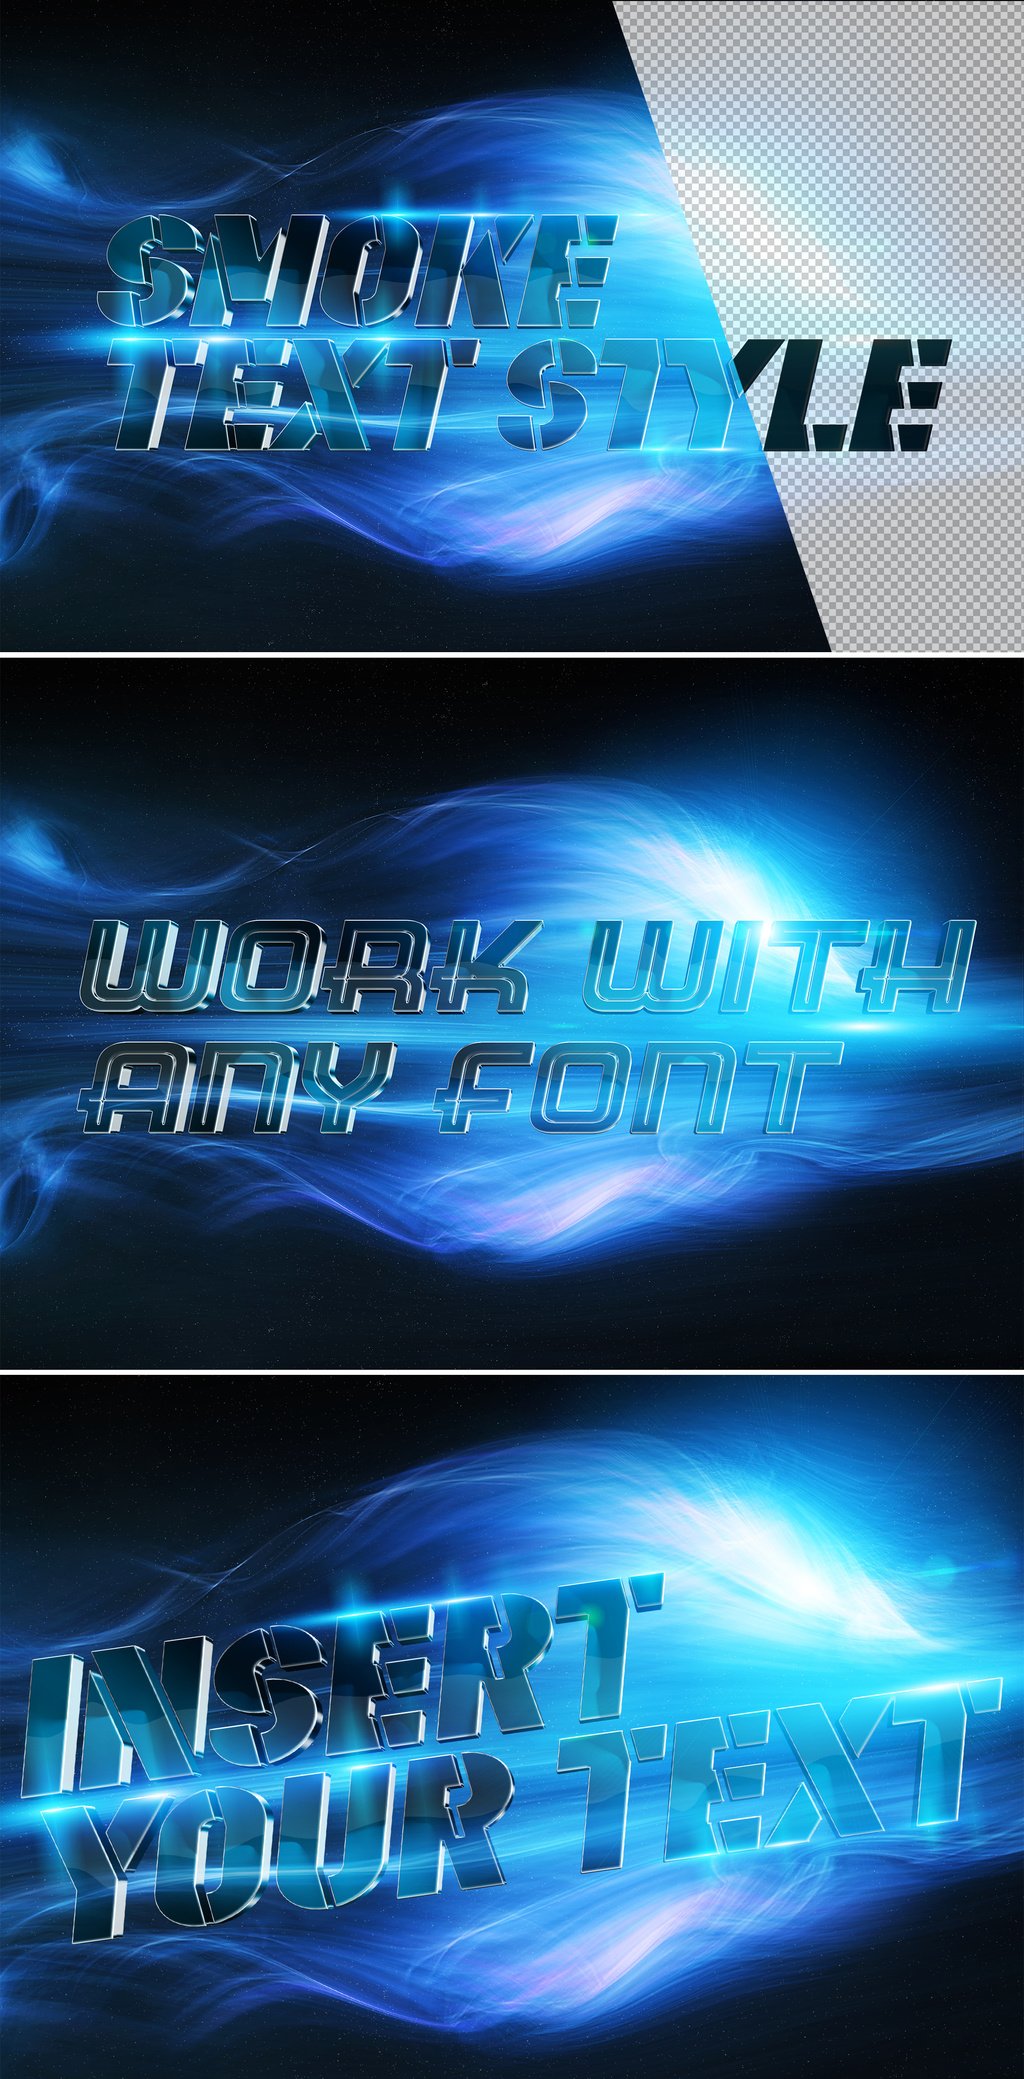 Download Download Metallic 3D Text Effect Mockup with Blue Smoke 324636466 - SoftArchive